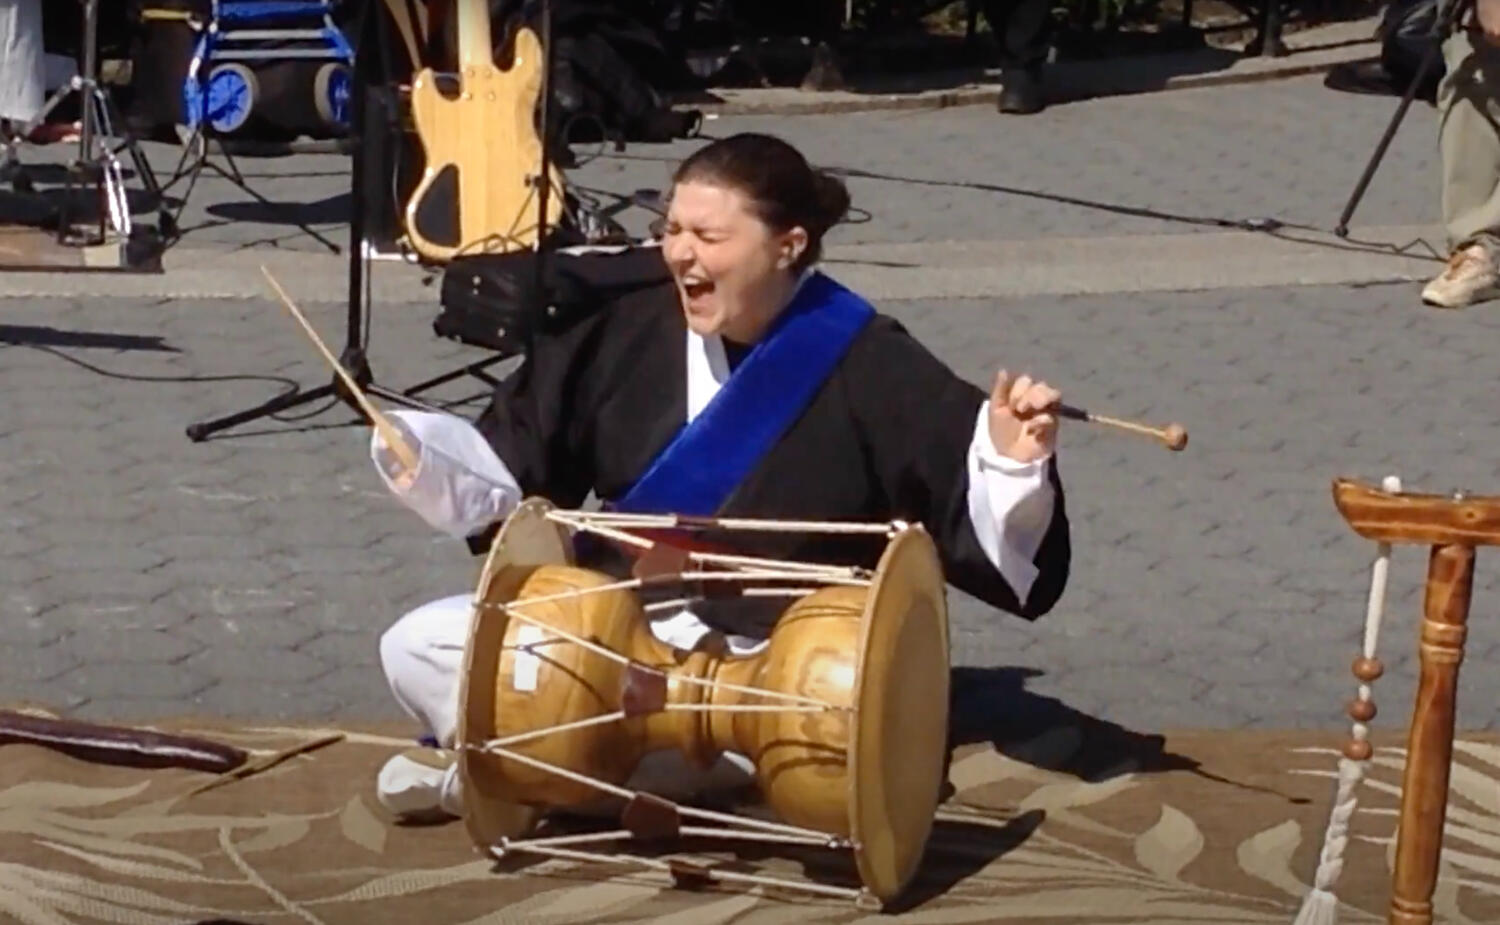 Melanie Ehrlich playing janggoo, an hourglass-shaped traditional Korean drum, with eyes shut and mouth open in a smiling yell of excitement